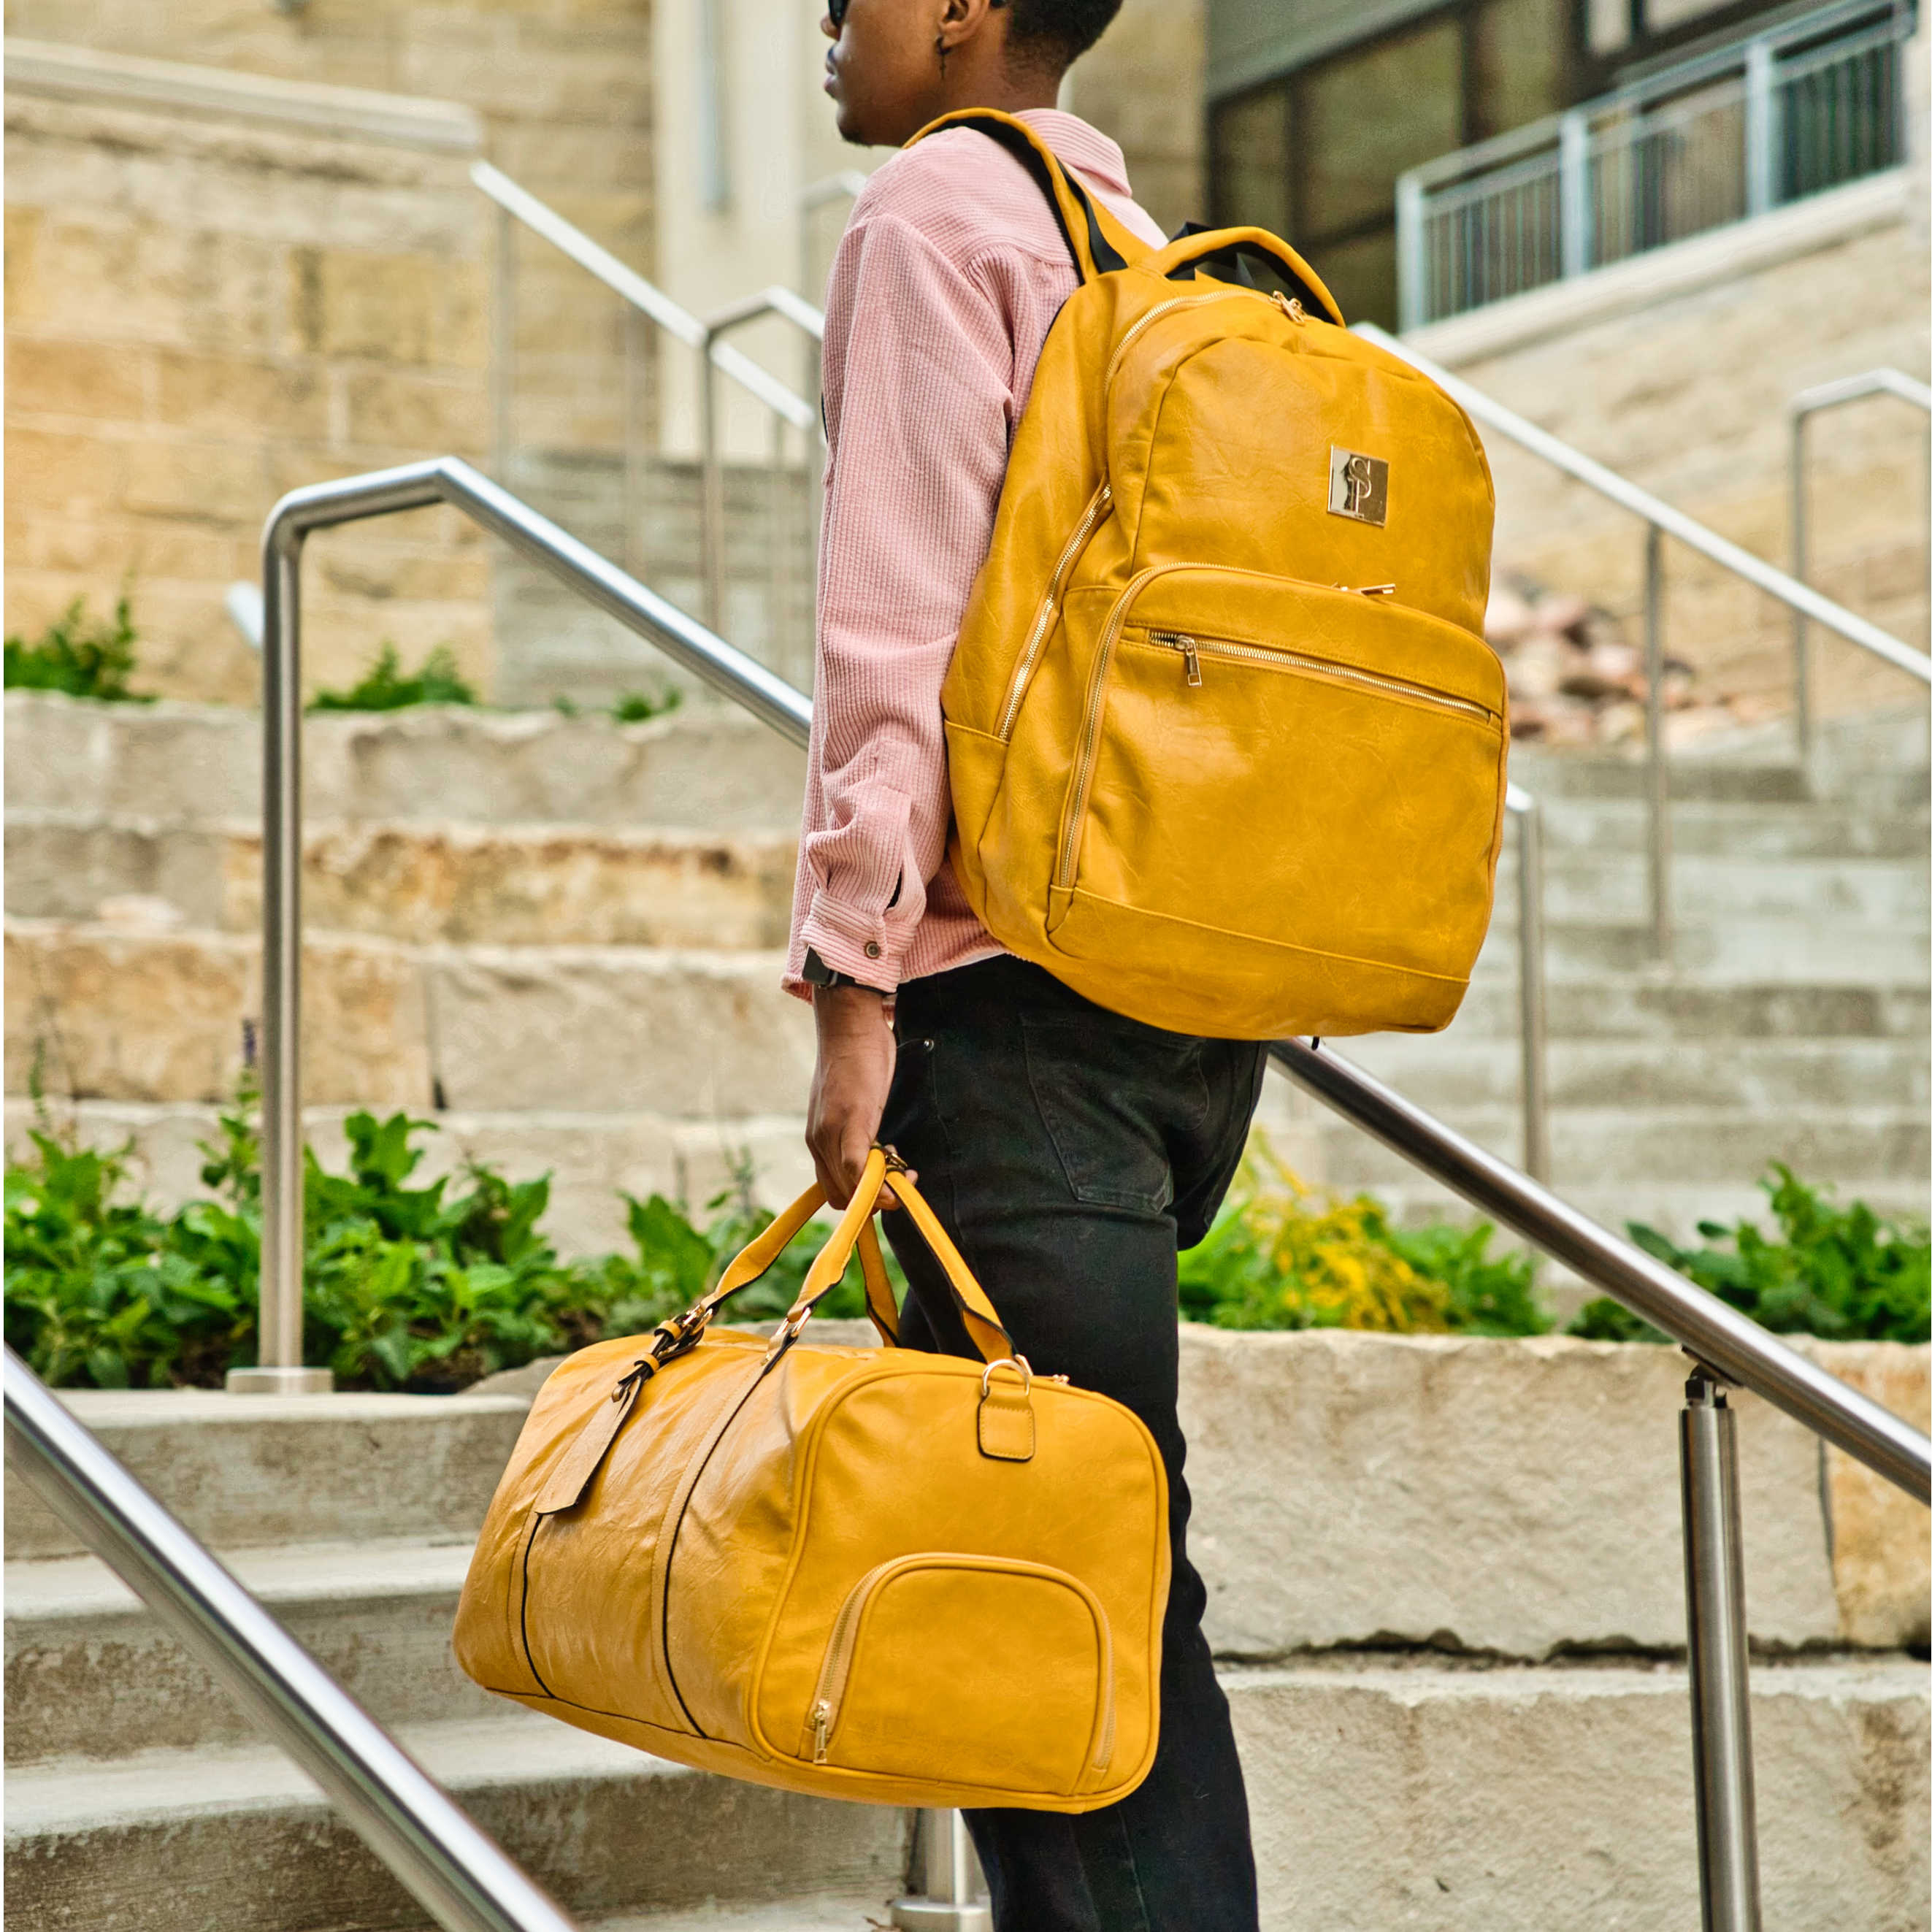 Yellow Tumbled Leather 2 Bag Set (Commuter and Duffle) - Sole Premise